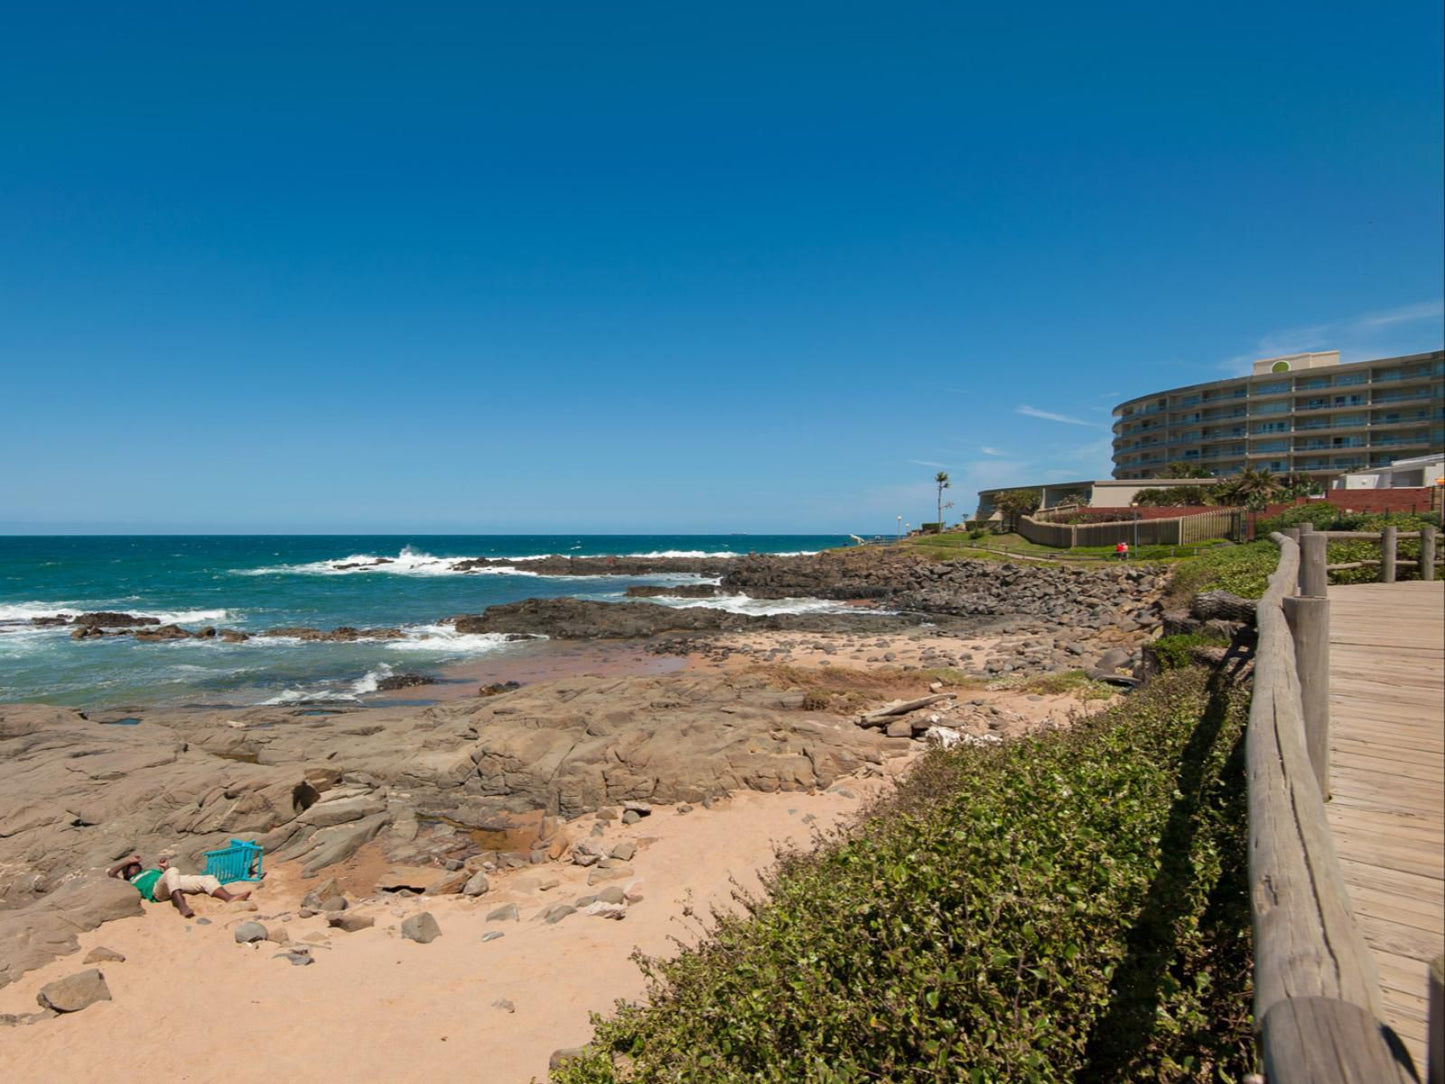 Ballito Sands Penthouse Ballito Kwazulu Natal South Africa Complementary Colors, Beach, Nature, Sand, Ocean, Waters